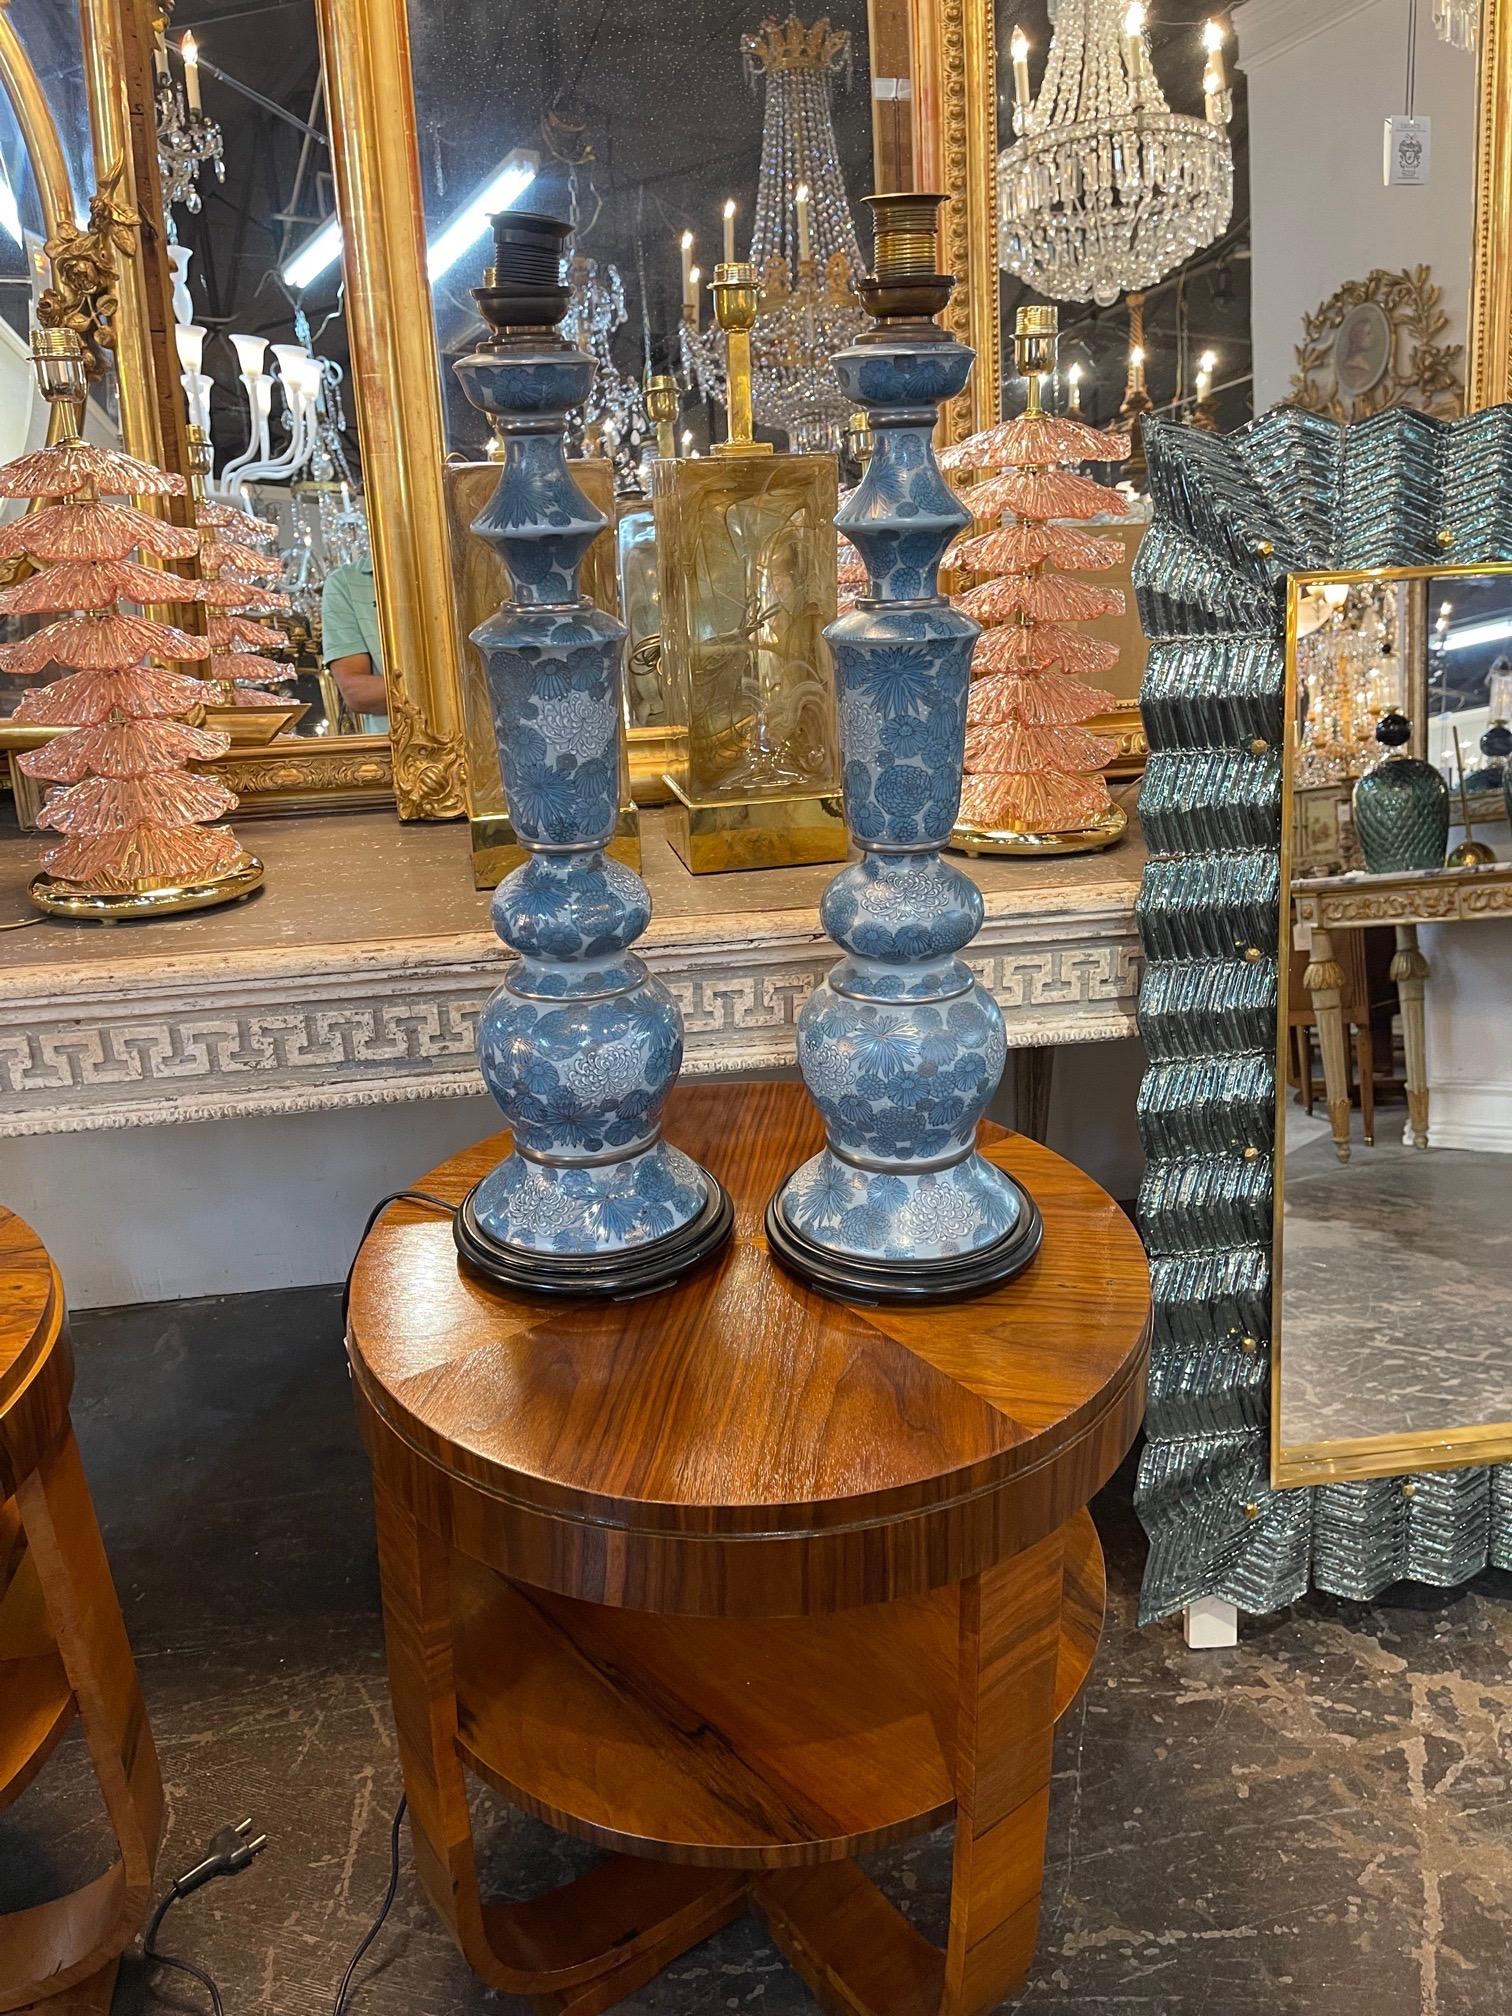 Exquisite pair of antique painted porcelain lamps. These have beautiful shades of blue and a lovely floral pattern. So pretty!